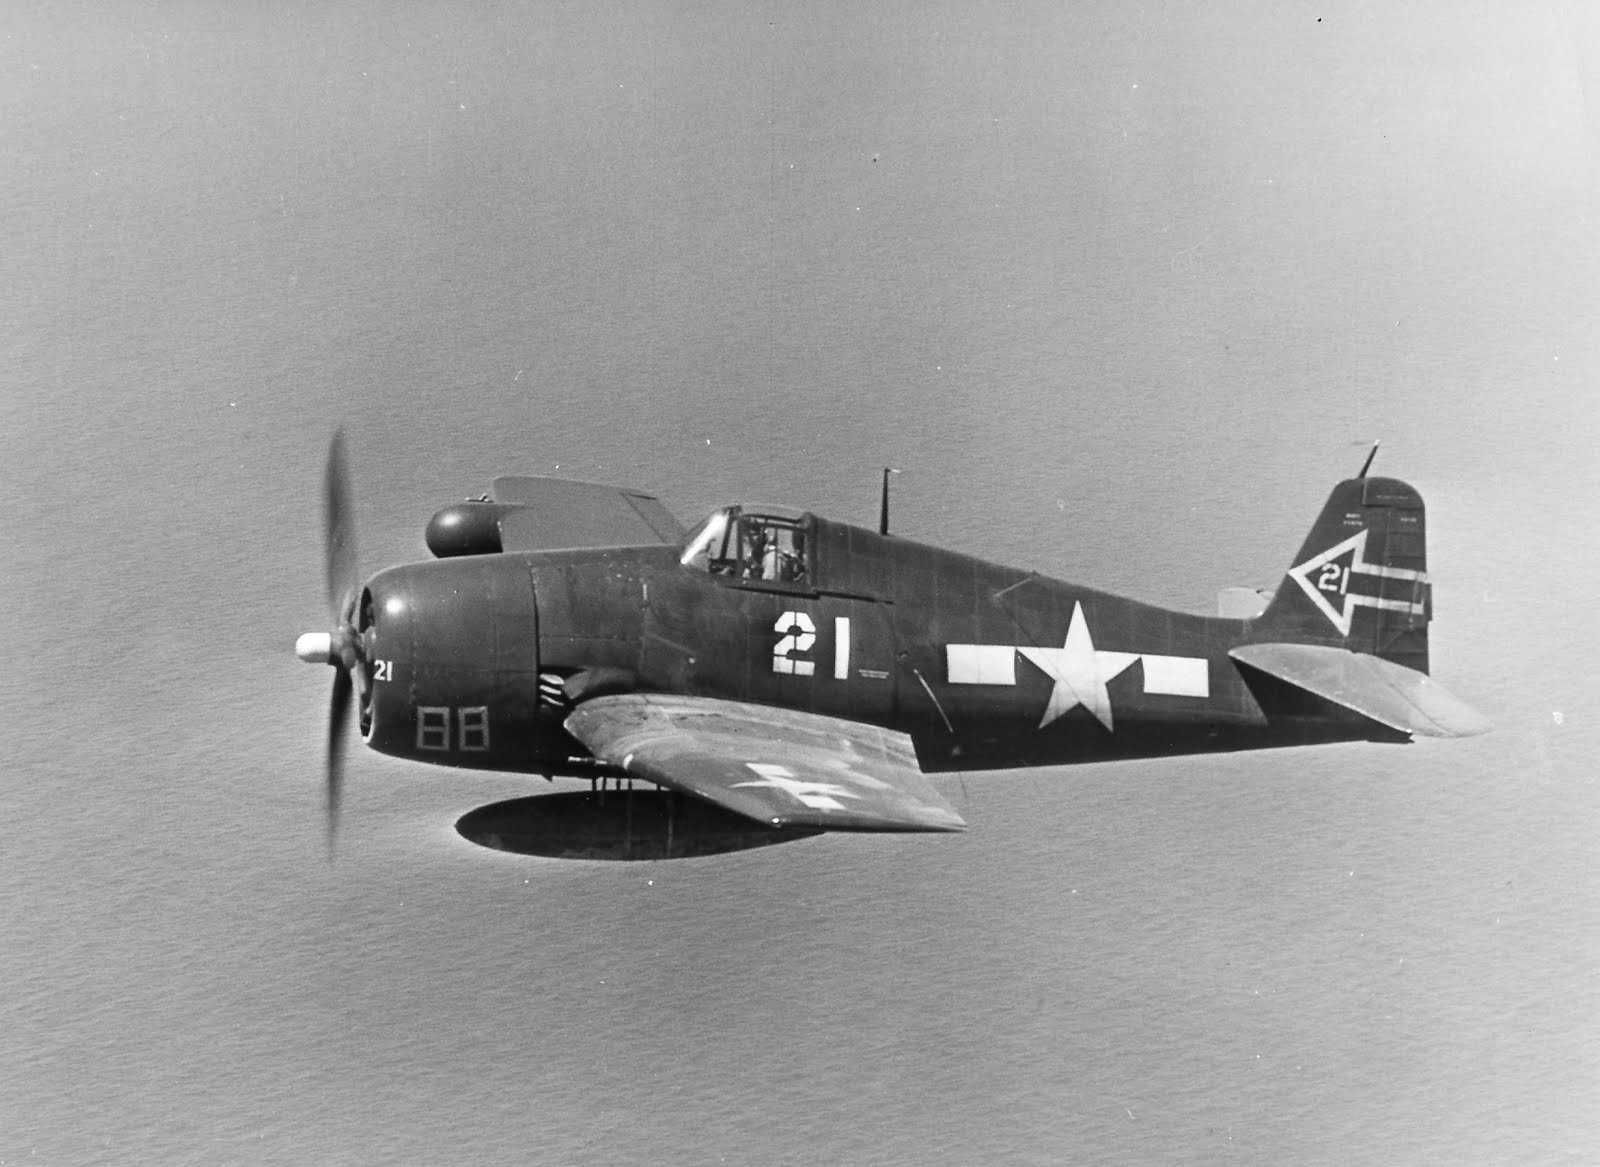 F6F-5N Hellcat night fighter of Night Fighter Squadron 90 based on the carrier USS Enterprise, 1945. Note radome on left wing and flame dampeners on exhaust port.